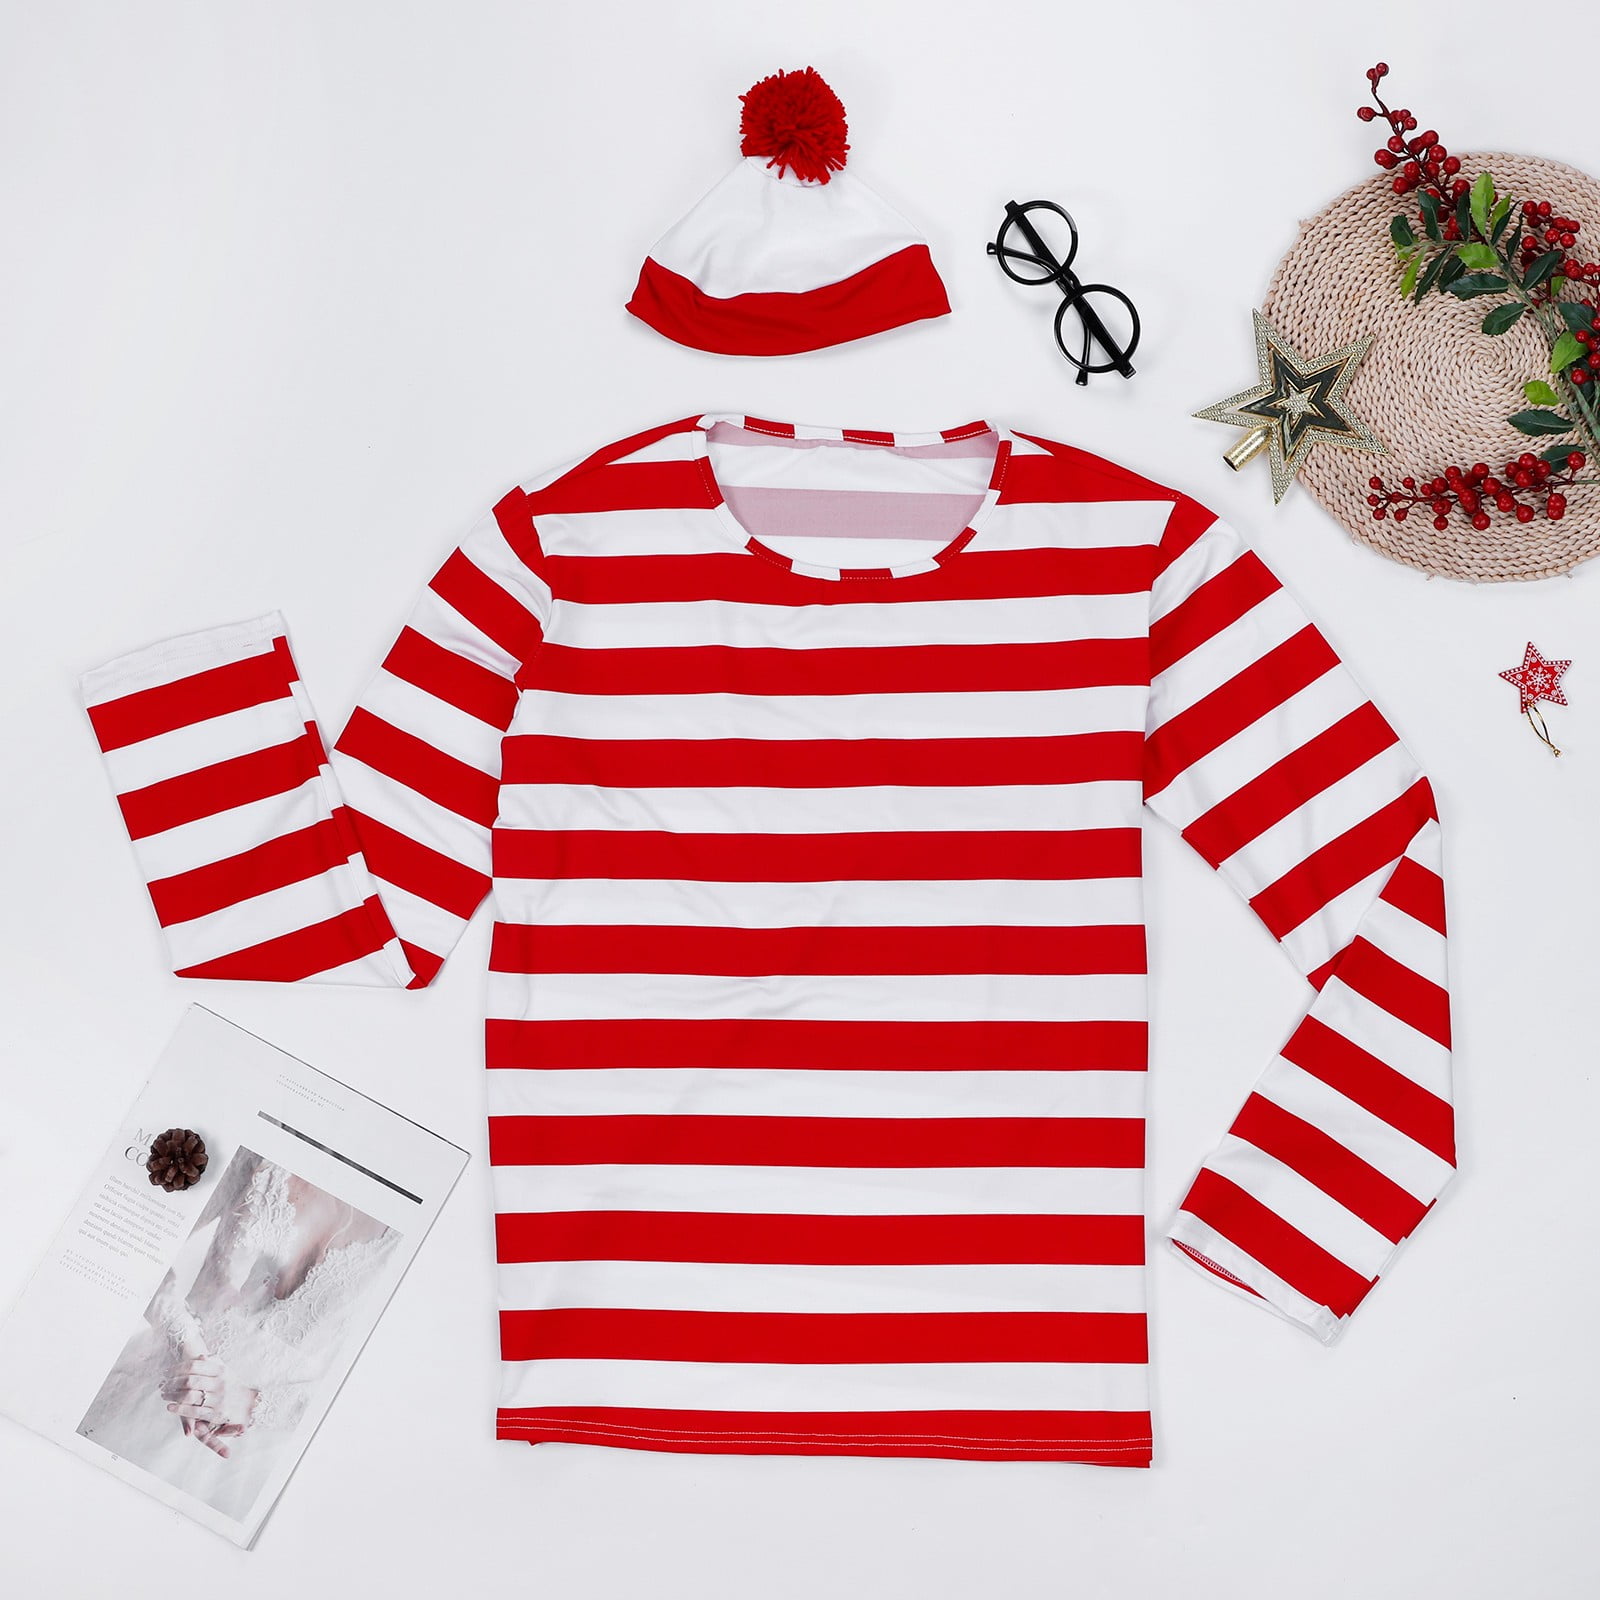 Men's Red And White Striped Shirt Cotton Christmas Cosplay Costume